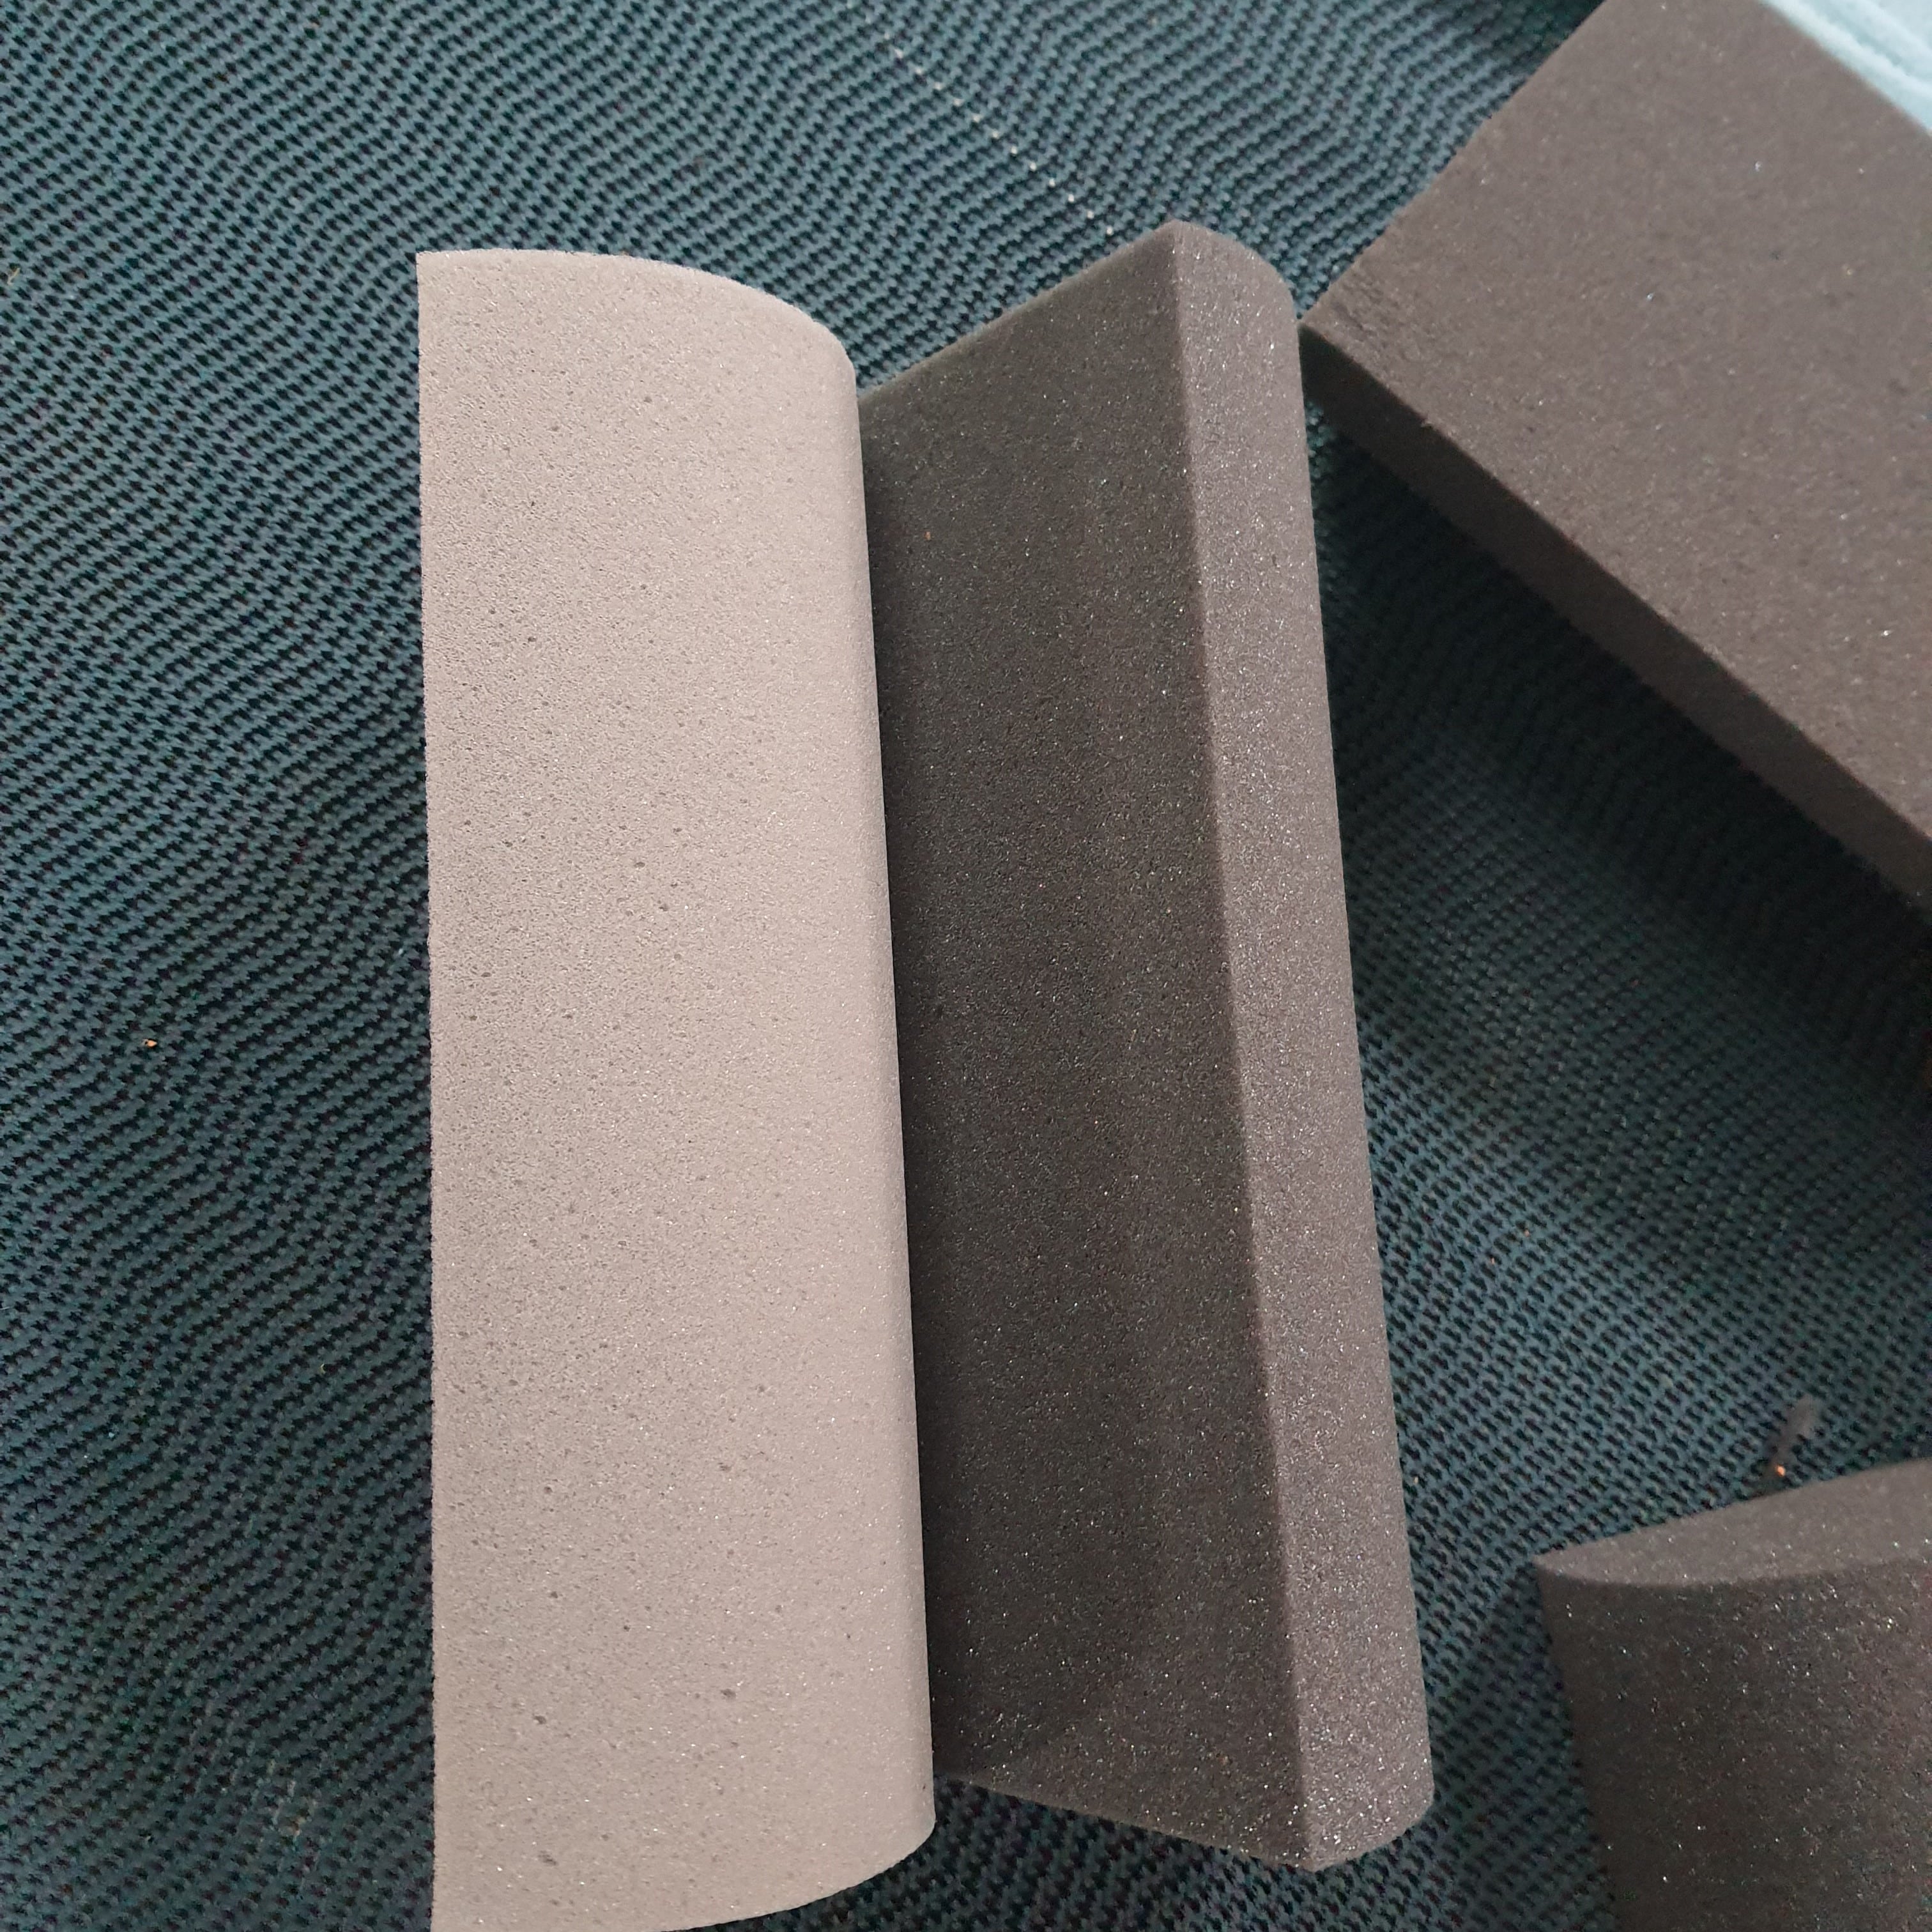 Reinforced Polyurethane Foam Board Good price Excellent Materials Packaging Industry Professional Manufacturer High Quality